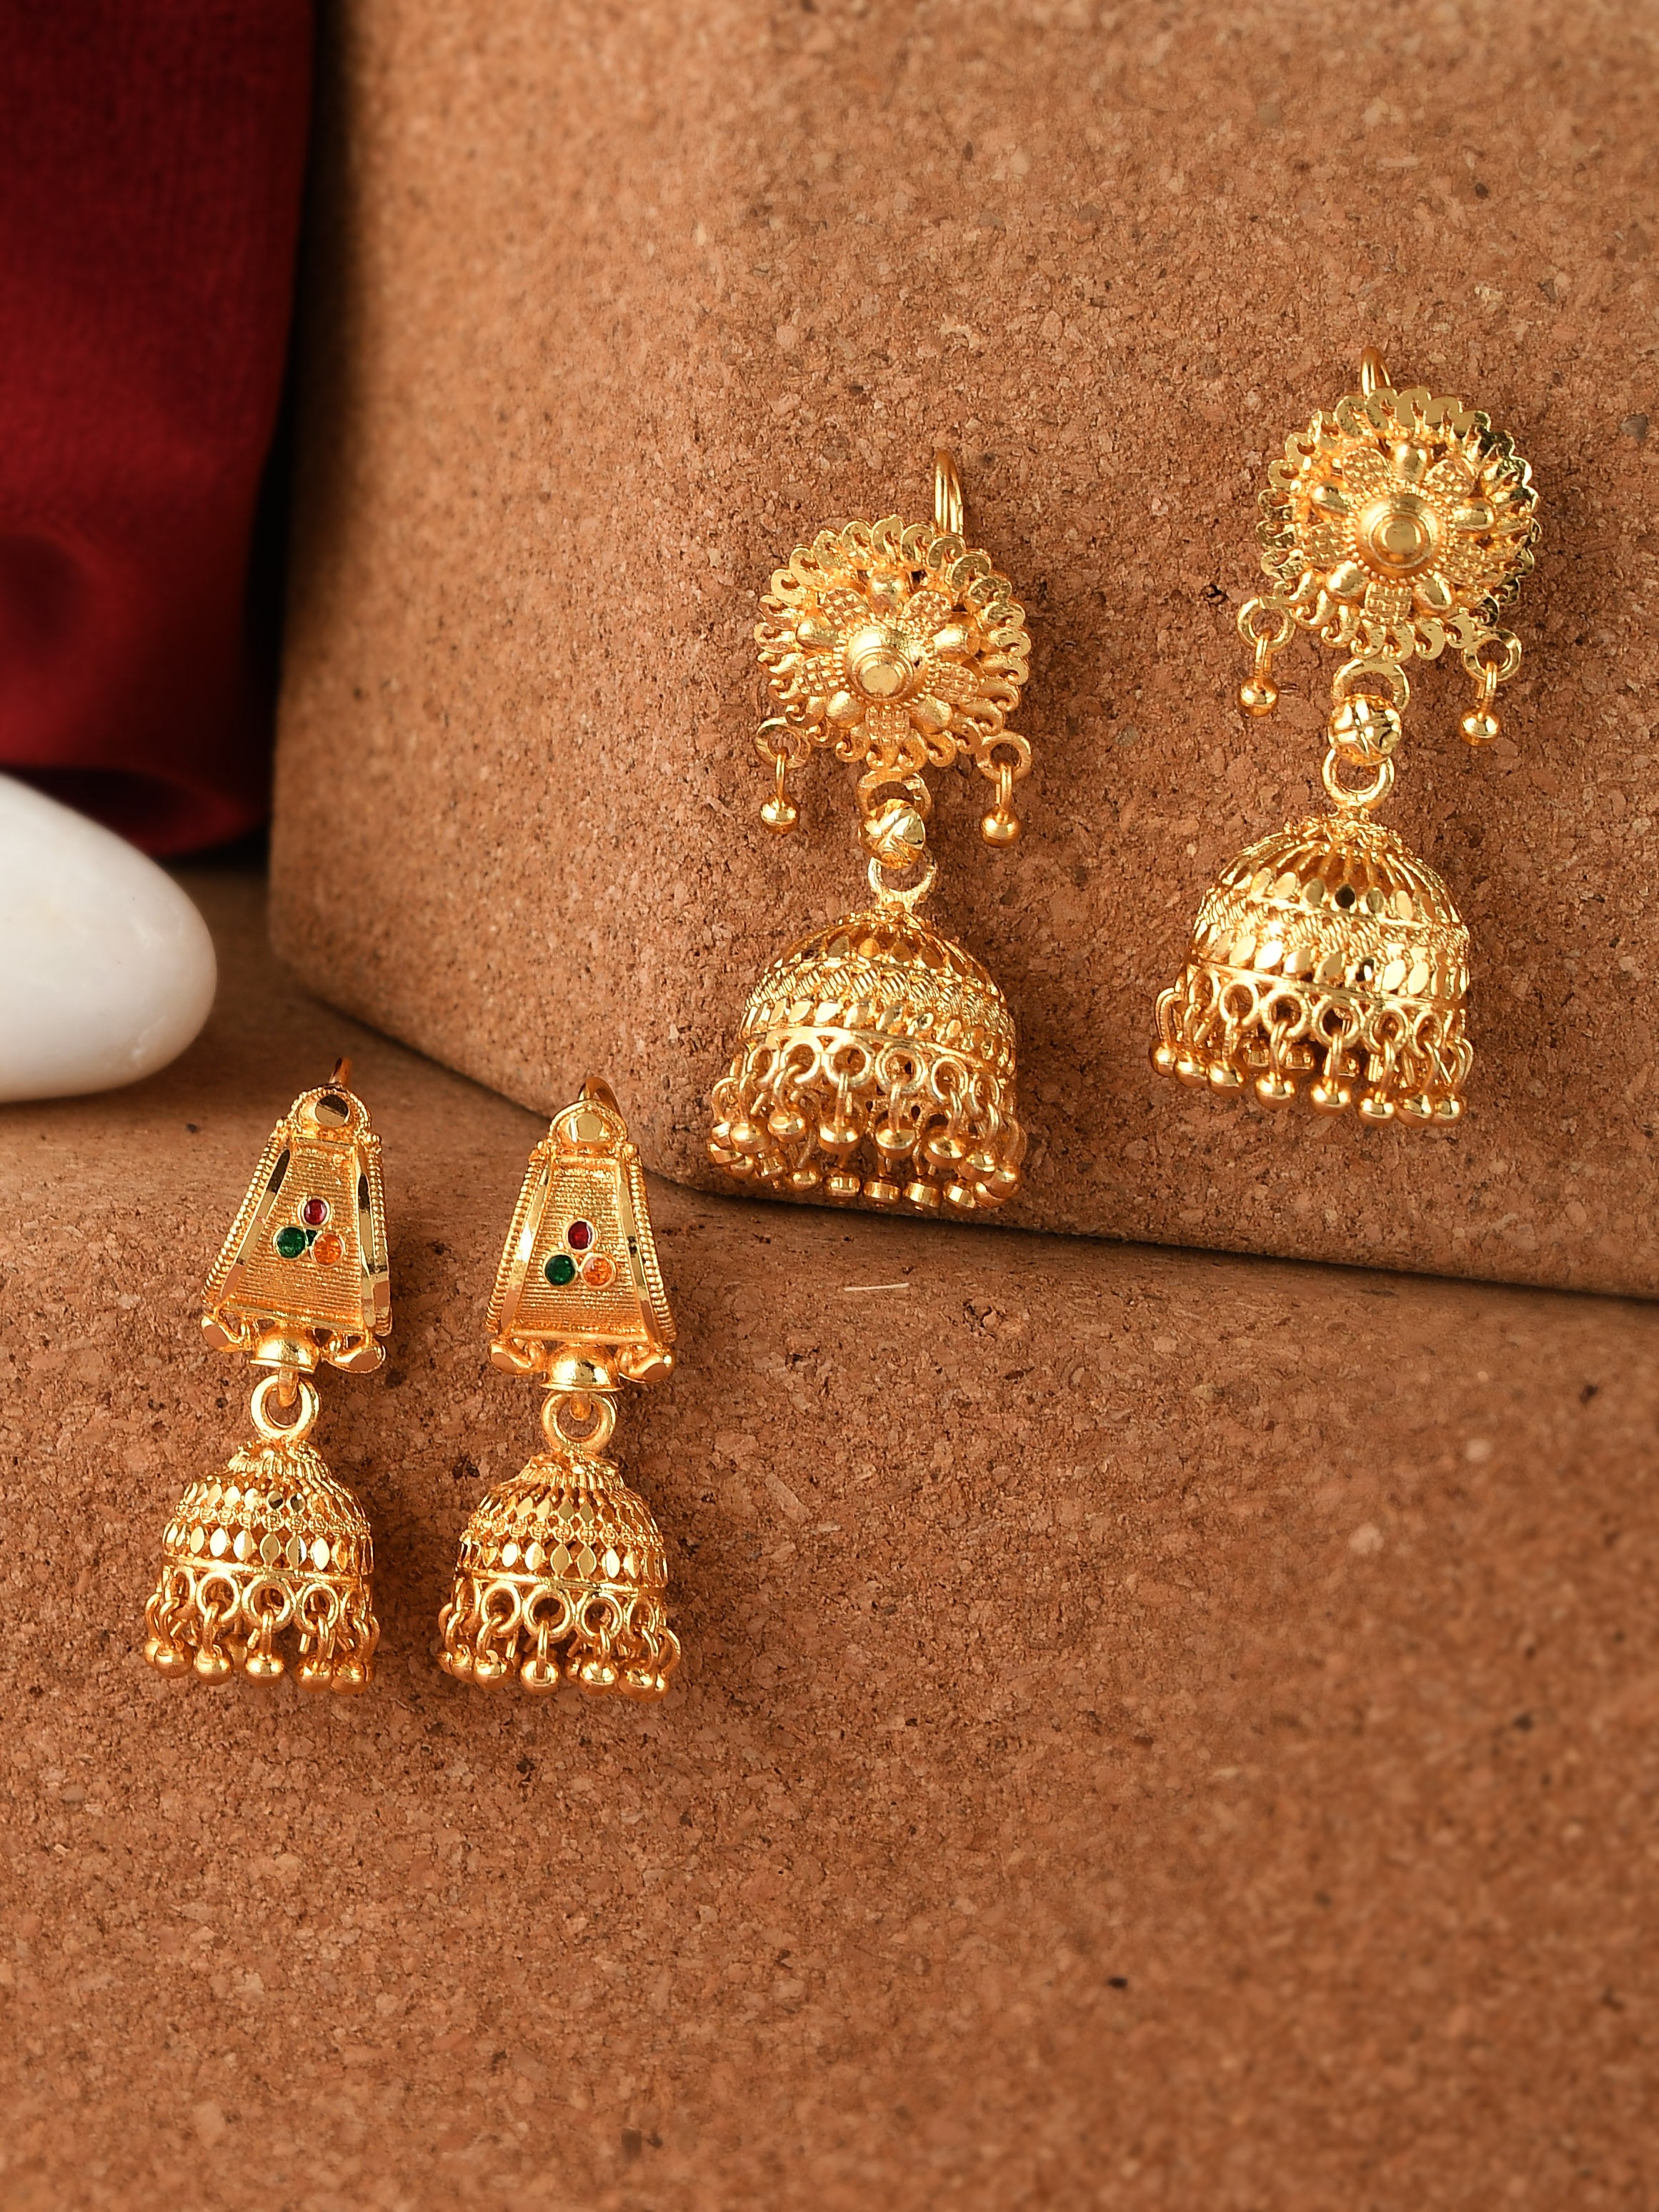 Oxidized Silver Jhumka Temple Jewellery Indian #jhumka #earrings #online  #shopping | Indian bridal jewelry sets, Indian jewelry earrings, Indian  jewelry